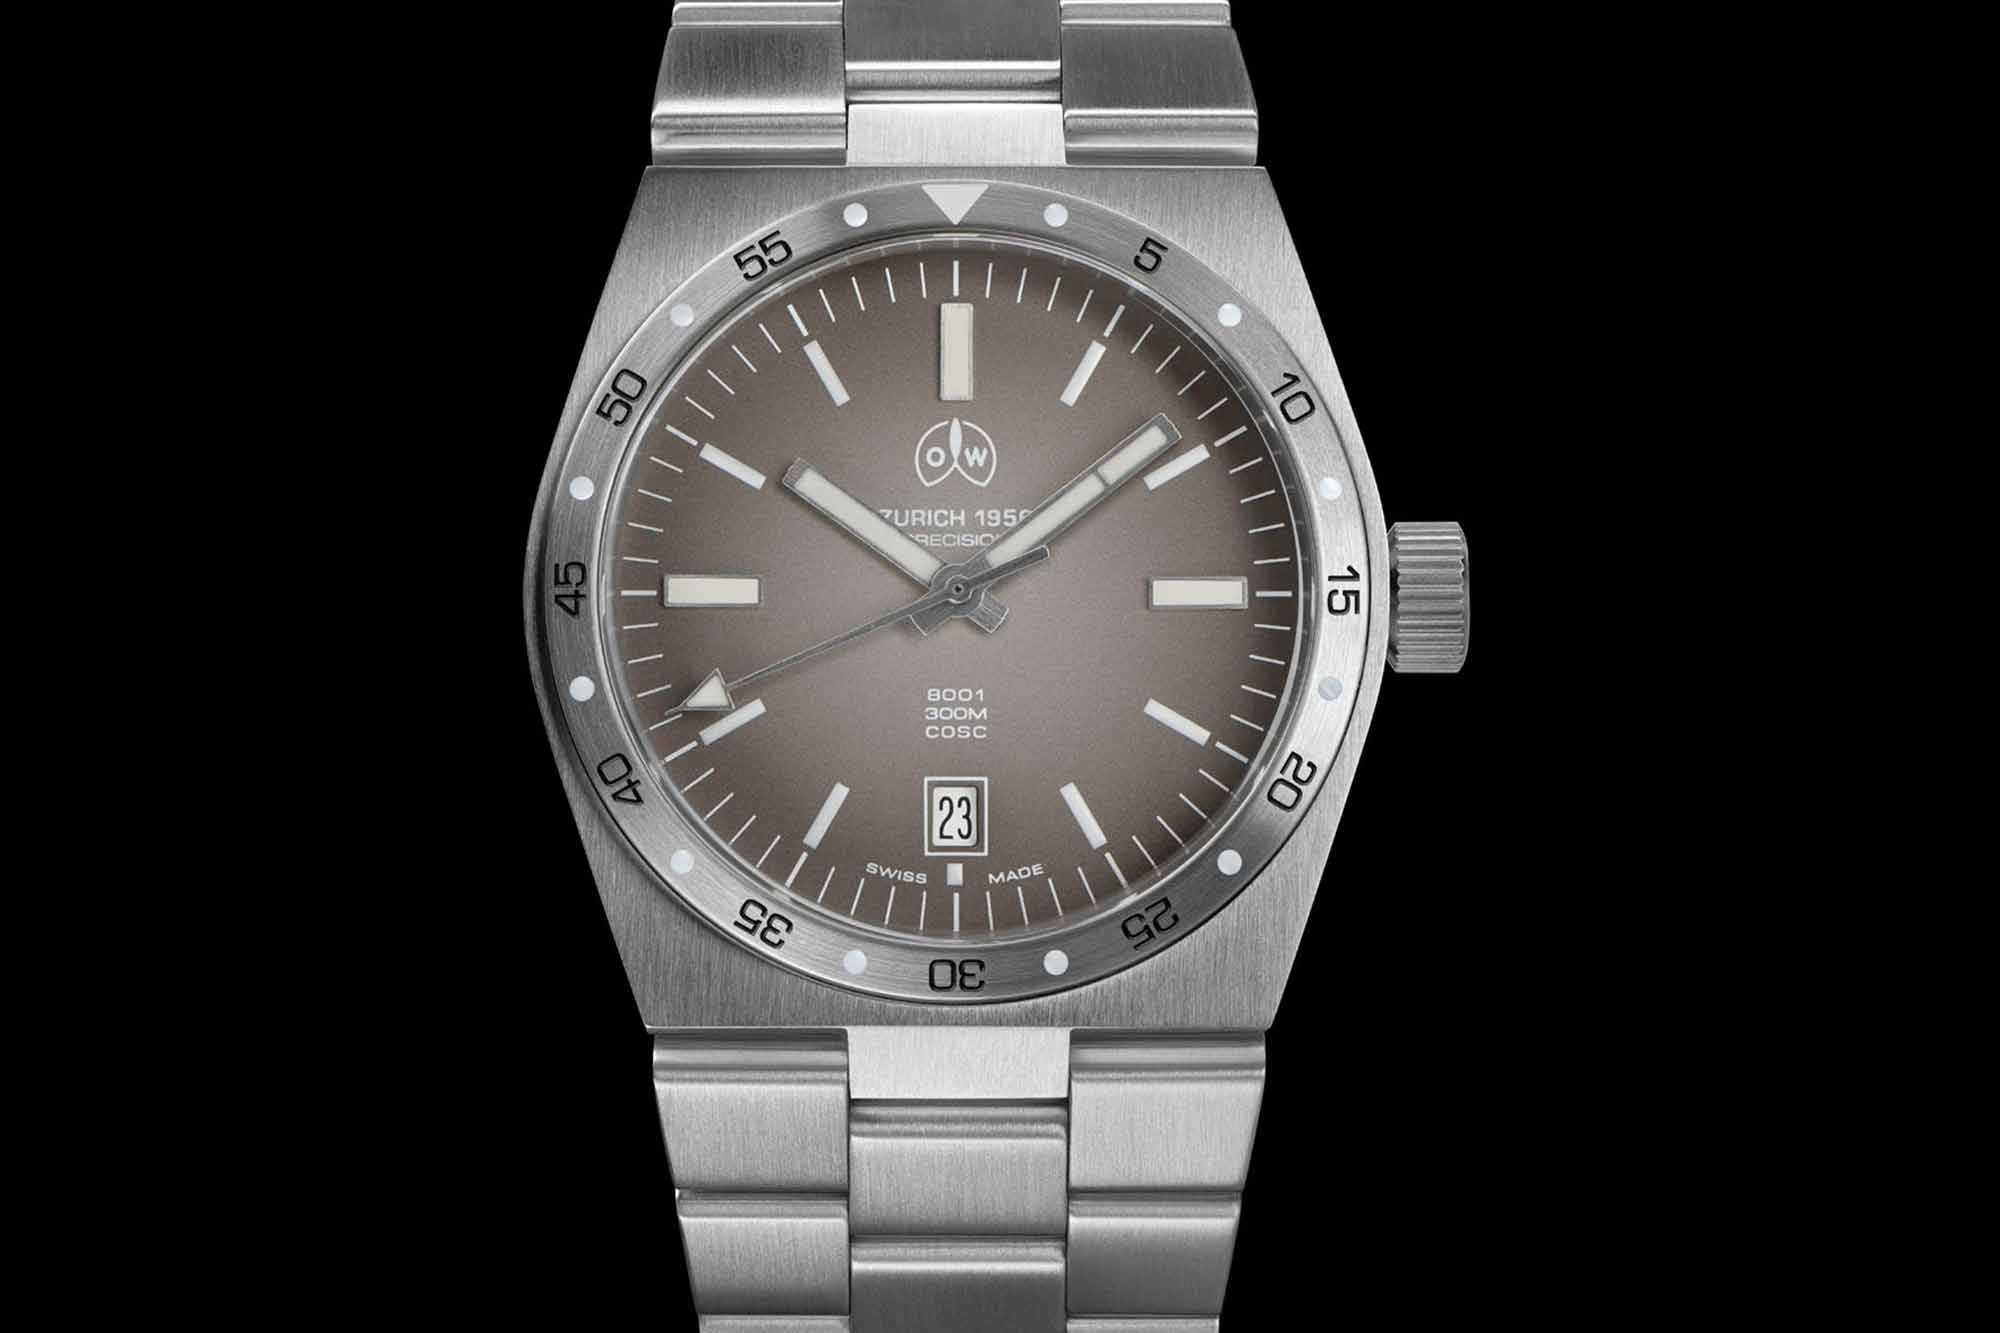 Ollech & Wajs Introduces the 8001, an Integrated Bracelet Sports Watch Based on a 1970s Chronograph